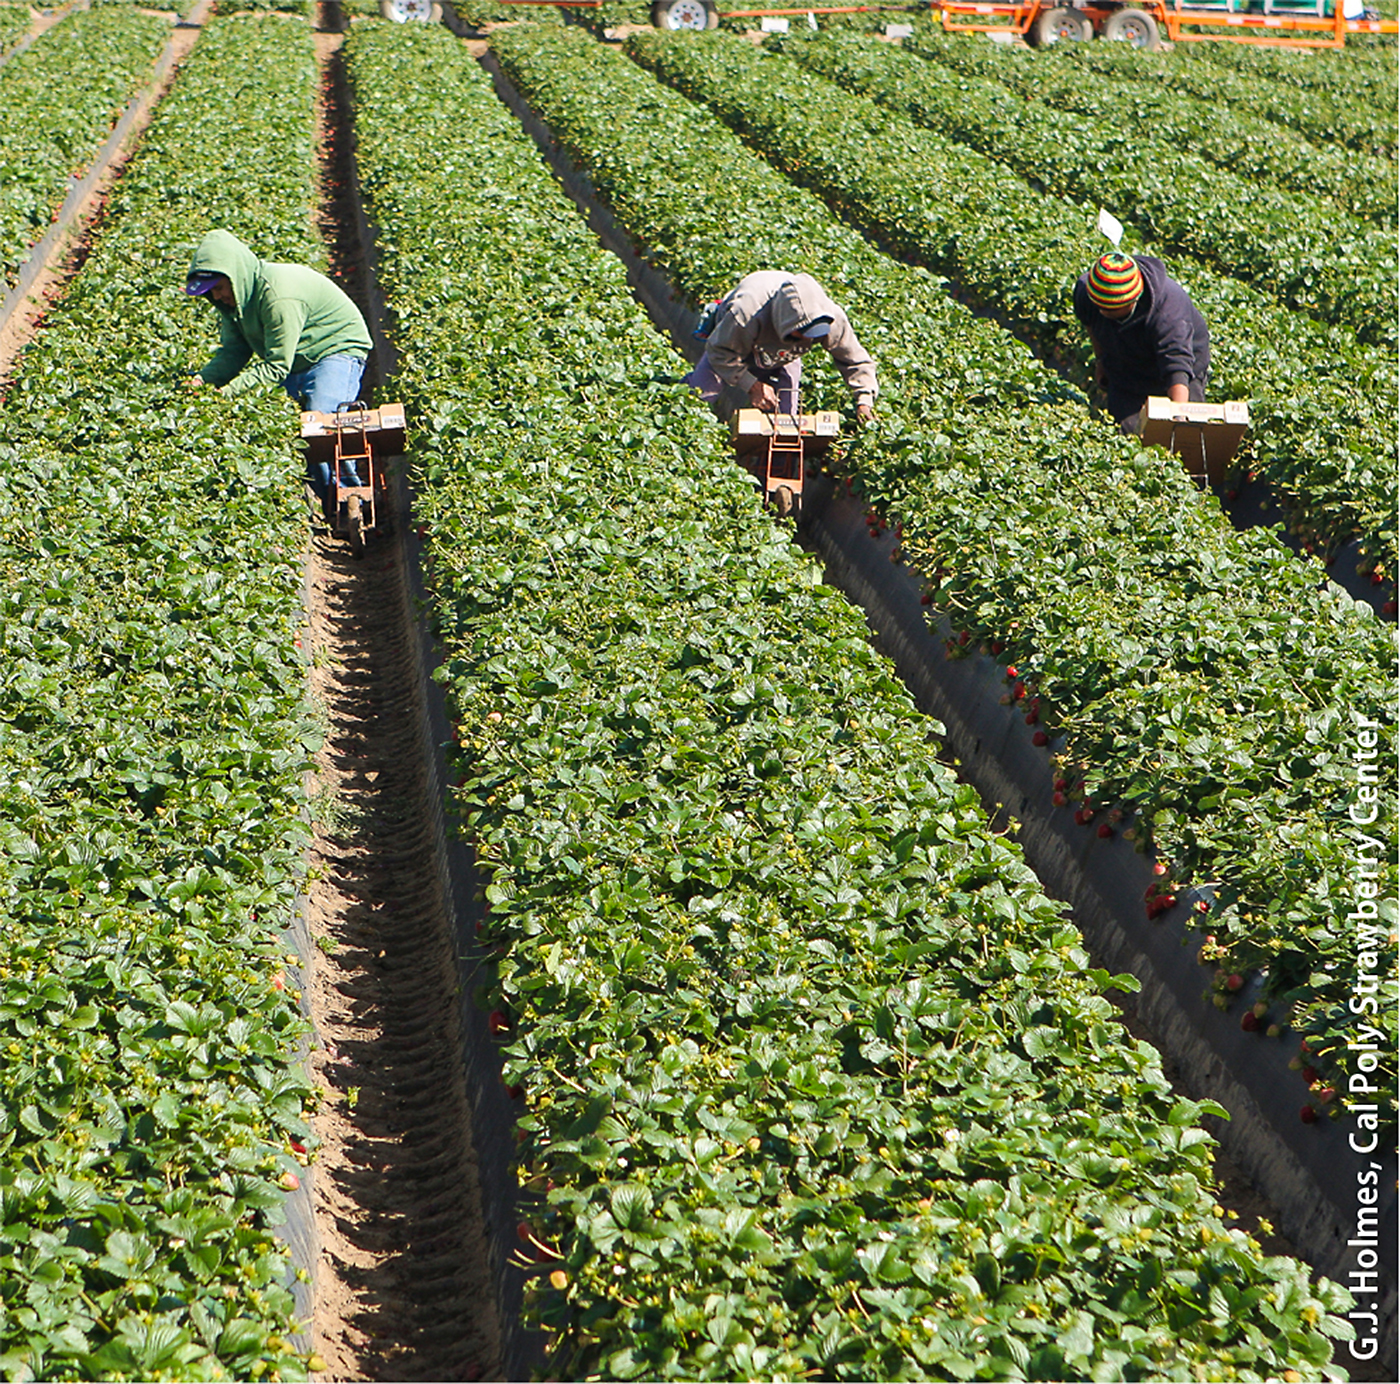 A manual harvest crew picking strawberries for fresh market sale. While it is difficult to match the speed and accuracy of human harvesters, rising labor costs make robotic alternatives increasingly attractive.